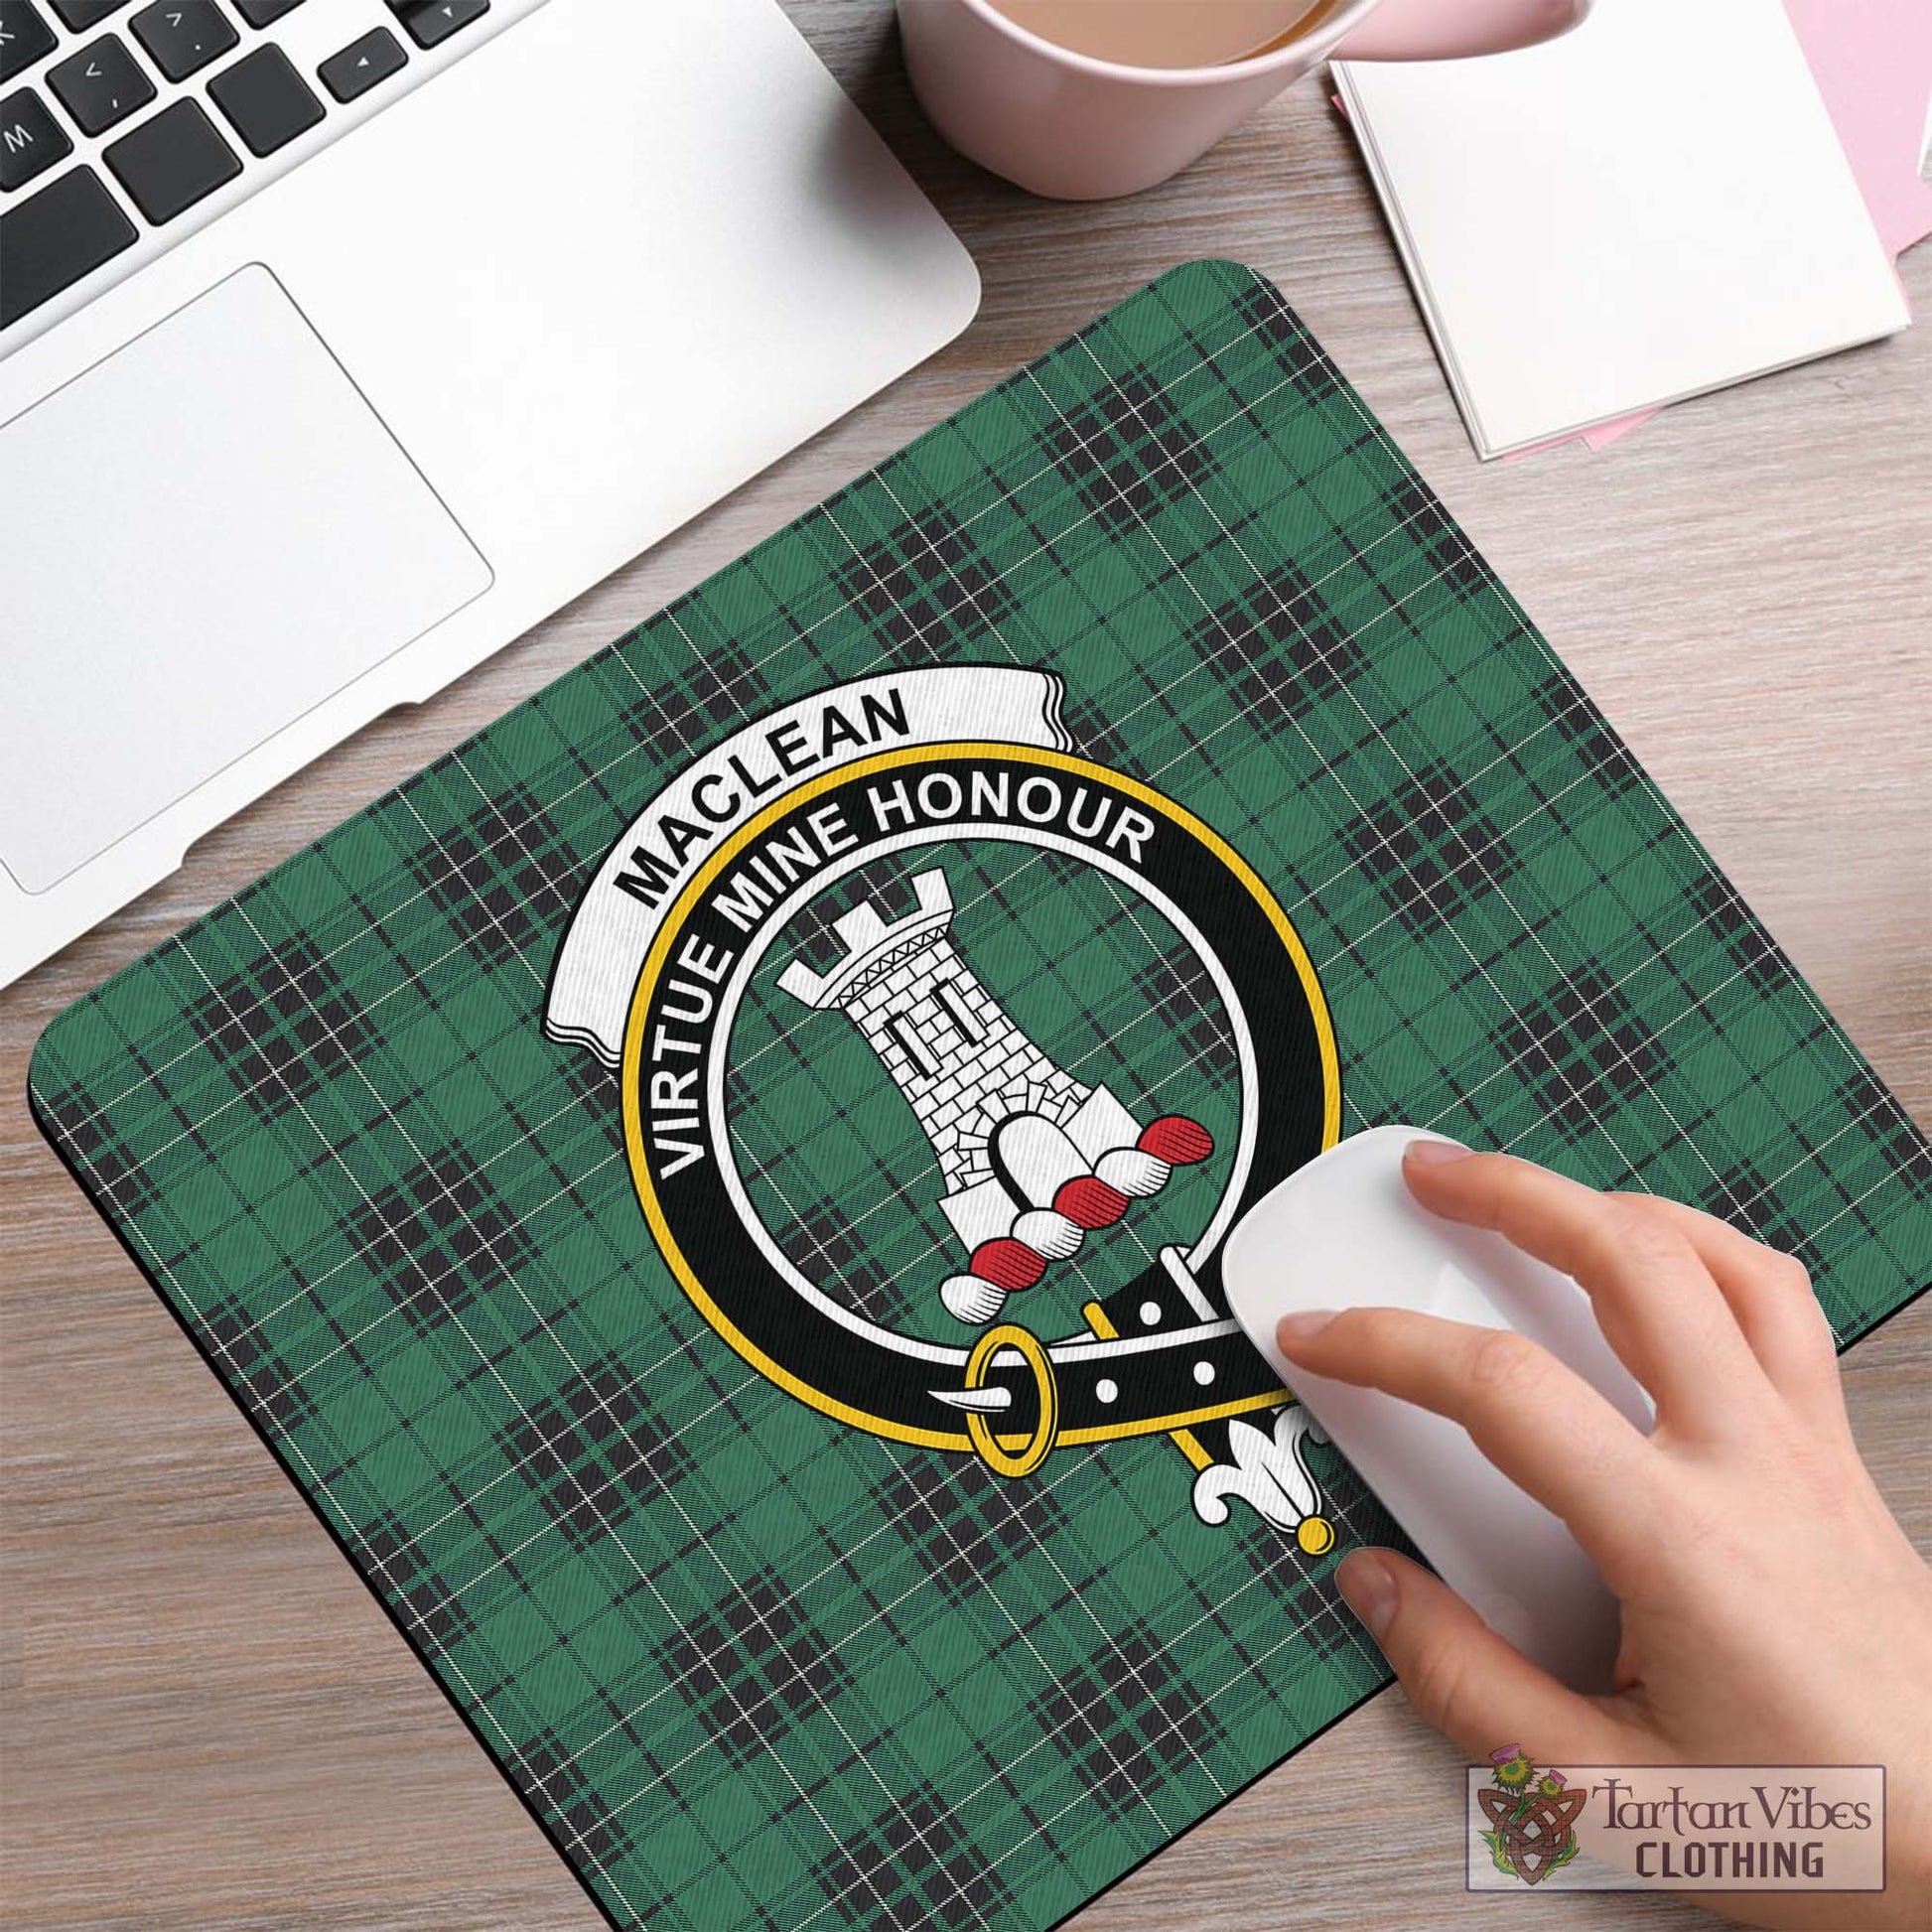 Tartan Vibes Clothing MacLean Hunting Ancient Tartan Mouse Pad with Family Crest